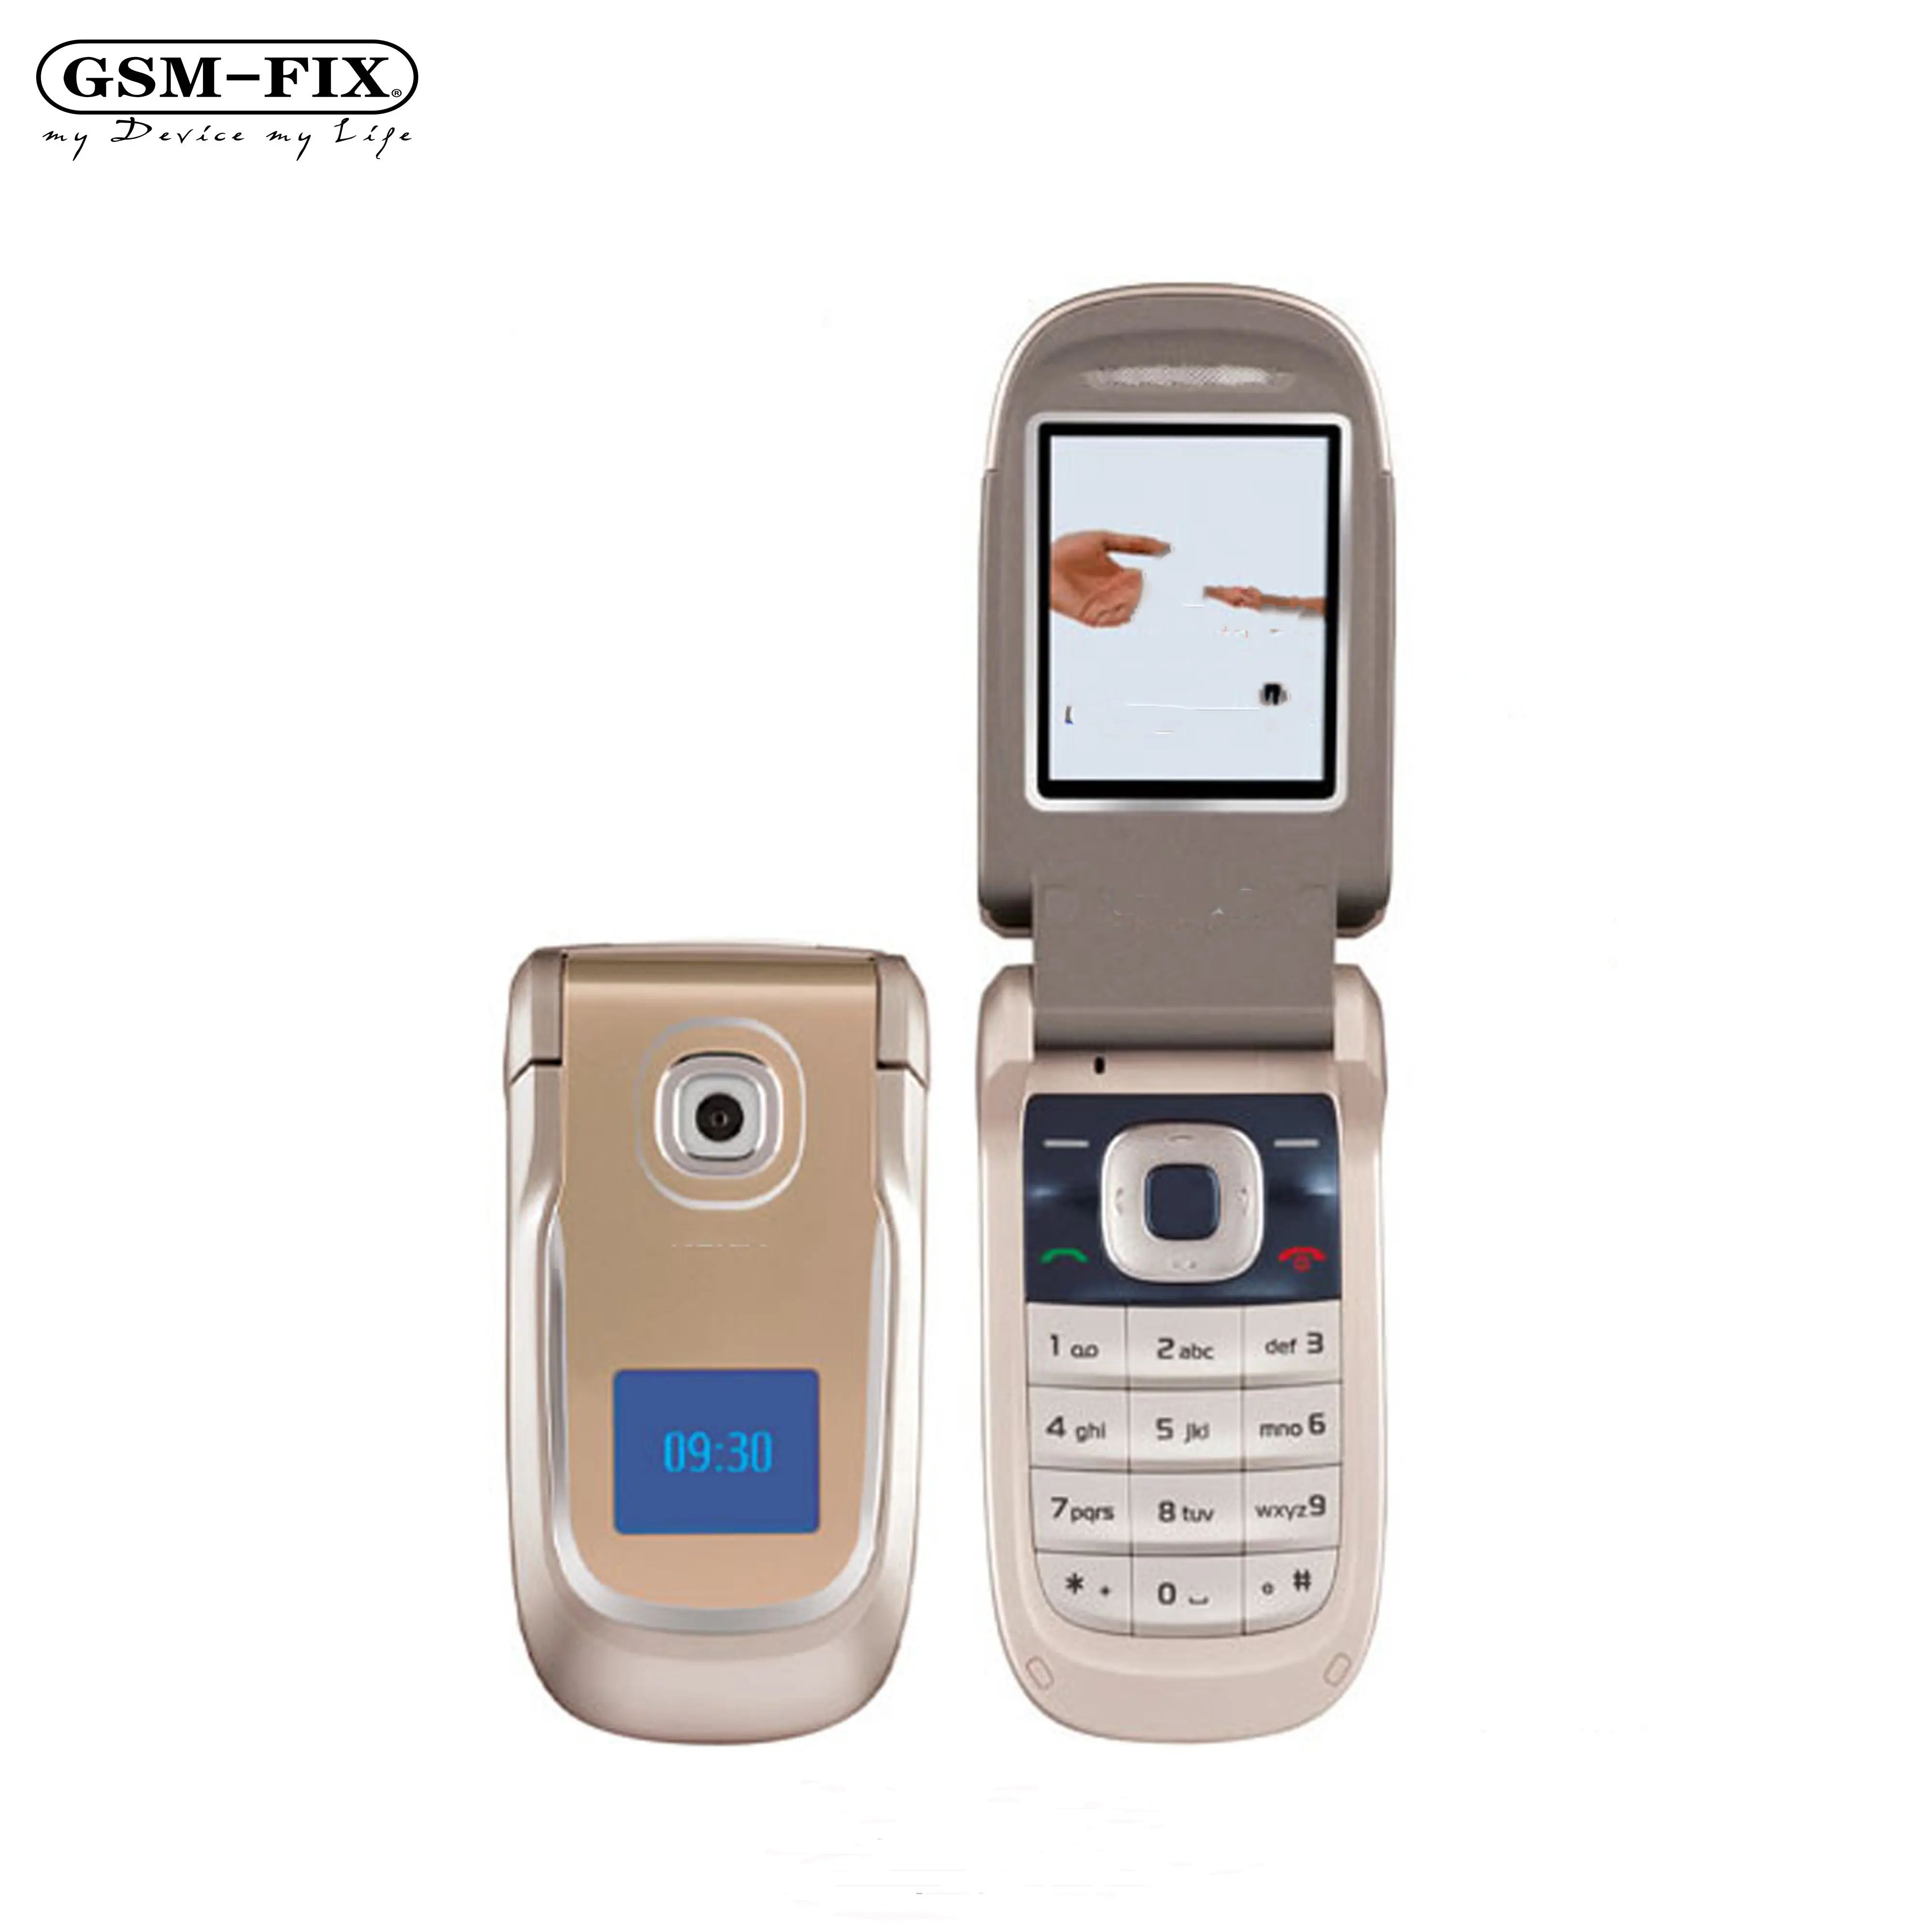 GSM-FIX Hot Selling Original Factory Unlocked Cheap Classic Flip Mobile Cell Phone For Nokia 2760